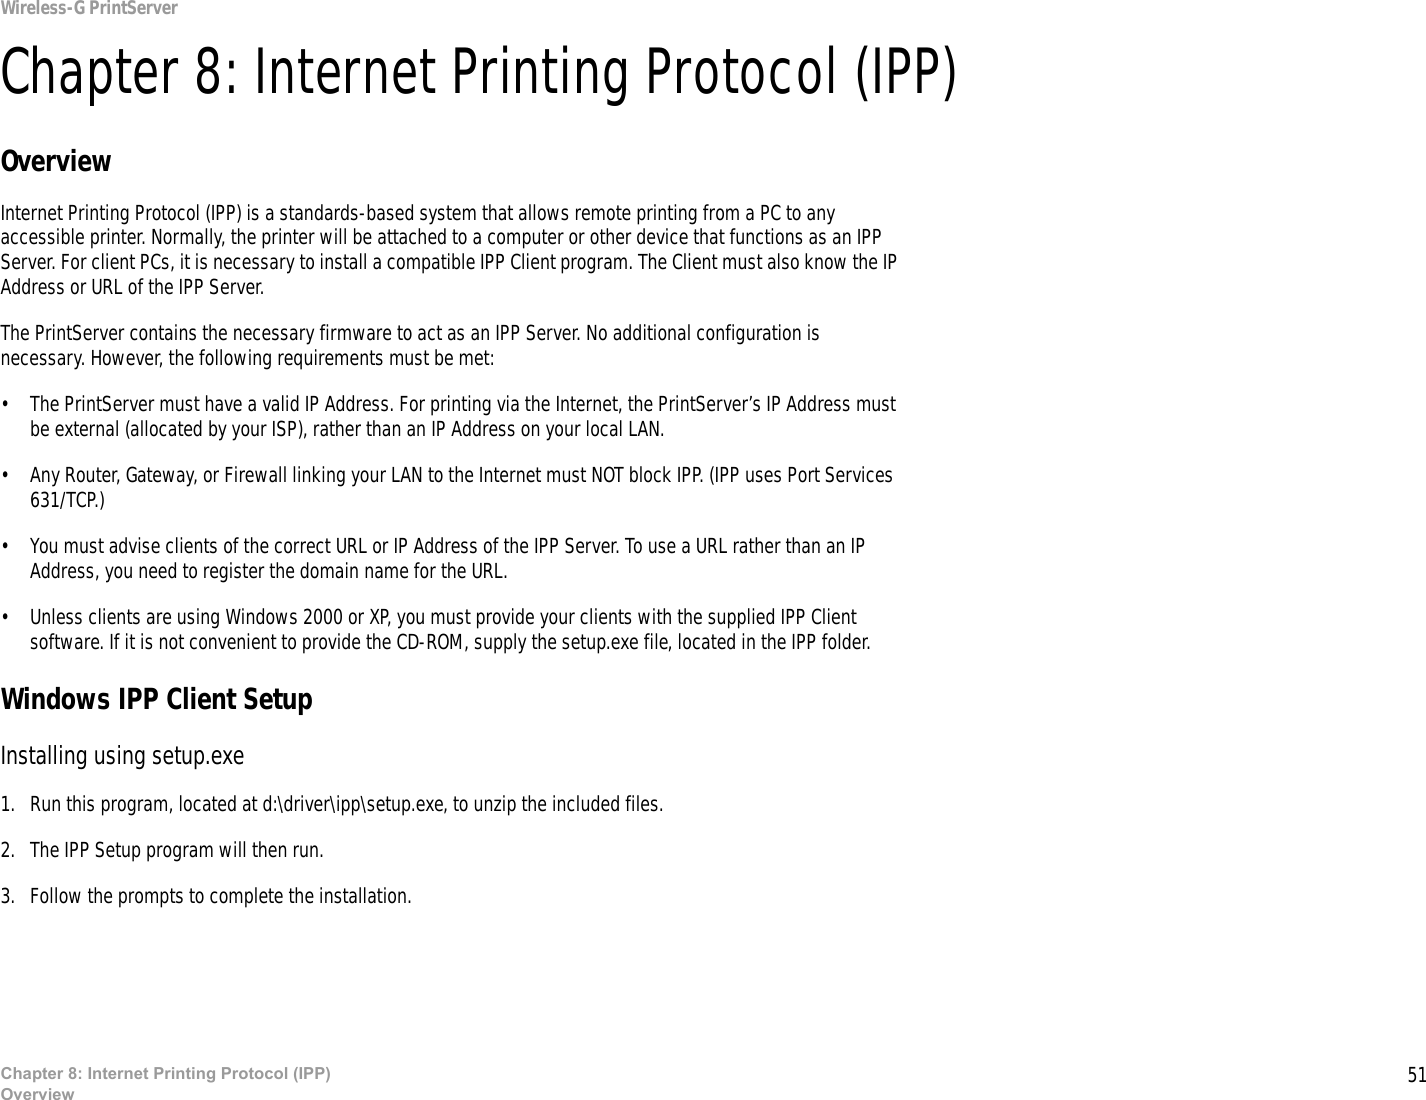 51Chapter 8: Internet Printing Protocol (IPP)OverviewWireless-G PrintServerChapter 8: Internet Printing Protocol (IPP)OverviewInternet Printing Protocol (IPP) is a standards-based system that allows remote printing from a PC to any accessible printer. Normally, the printer will be attached to a computer or other device that functions as an IPP Server. For client PCs, it is necessary to install a compatible IPP Client program. The Client must also know the IP Address or URL of the IPP Server.The PrintServer contains the necessary firmware to act as an IPP Server. No additional configuration is necessary. However, the following requirements must be met:• The PrintServer must have a valid IP Address. For printing via the Internet, the PrintServer’s IP Address must be external (allocated by your ISP), rather than an IP Address on your local LAN.• Any Router, Gateway, or Firewall linking your LAN to the Internet must NOT block IPP. (IPP uses Port Services 631/TCP.)• You must advise clients of the correct URL or IP Address of the IPP Server. To use a URL rather than an IP Address, you need to register the domain name for the URL. • Unless clients are using Windows 2000 or XP, you must provide your clients with the supplied IPP Client software. If it is not convenient to provide the CD-ROM, supply the setup.exe file, located in the IPP folder. Windows IPP Client SetupInstalling using setup.exe1. Run this program, located at d:\driver\ipp\setup.exe, to unzip the included files. 2. The IPP Setup program will then run. 3. Follow the prompts to complete the installation. 